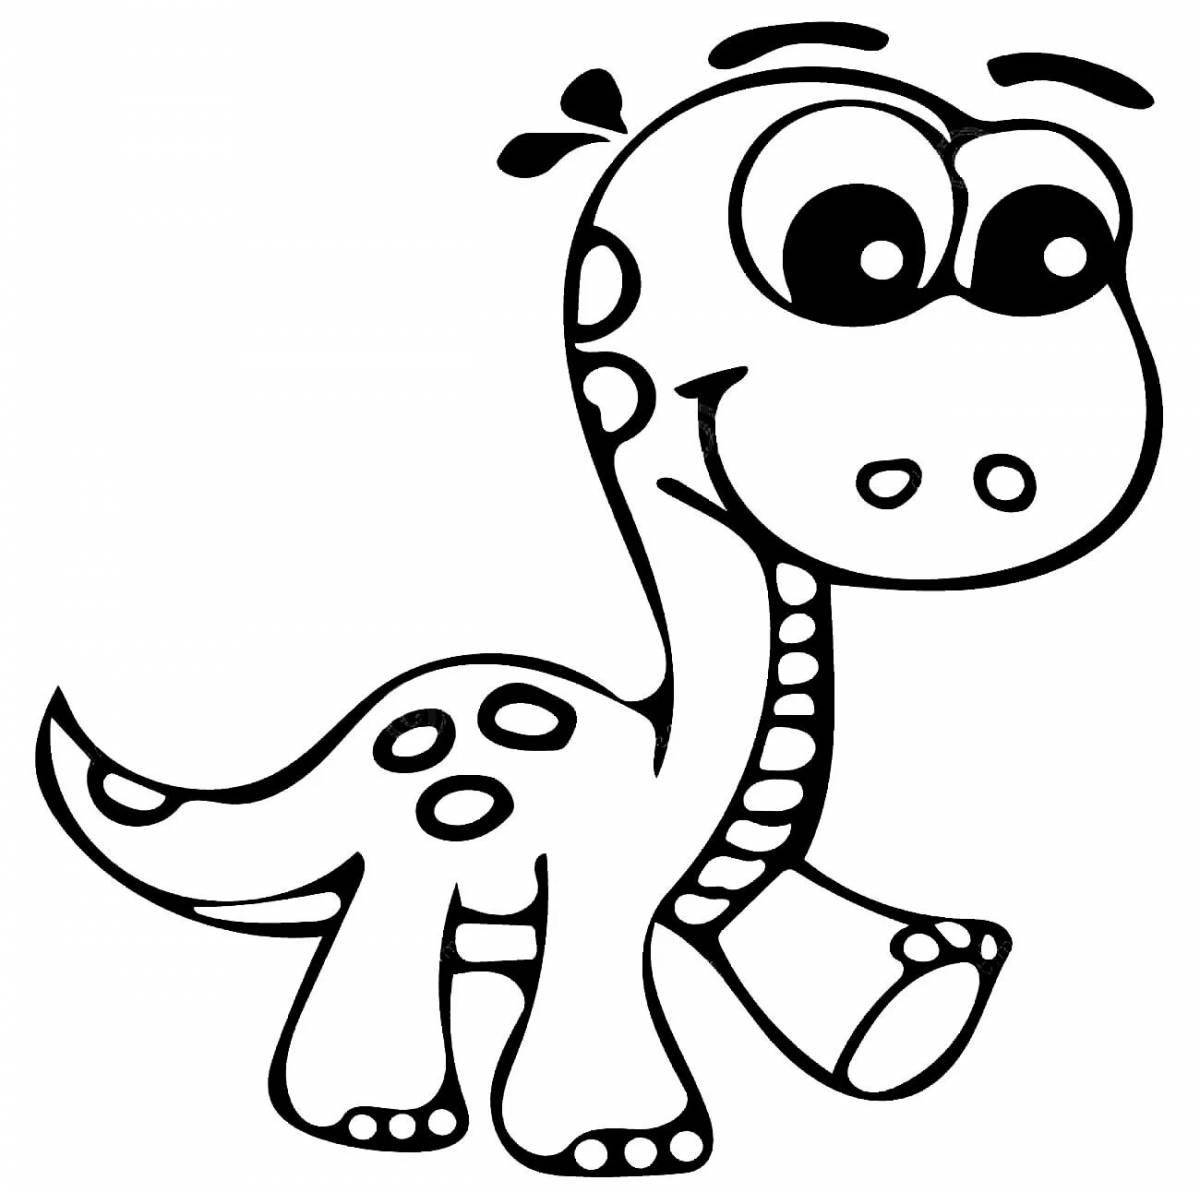 Cute and happy dinosaur coloring book